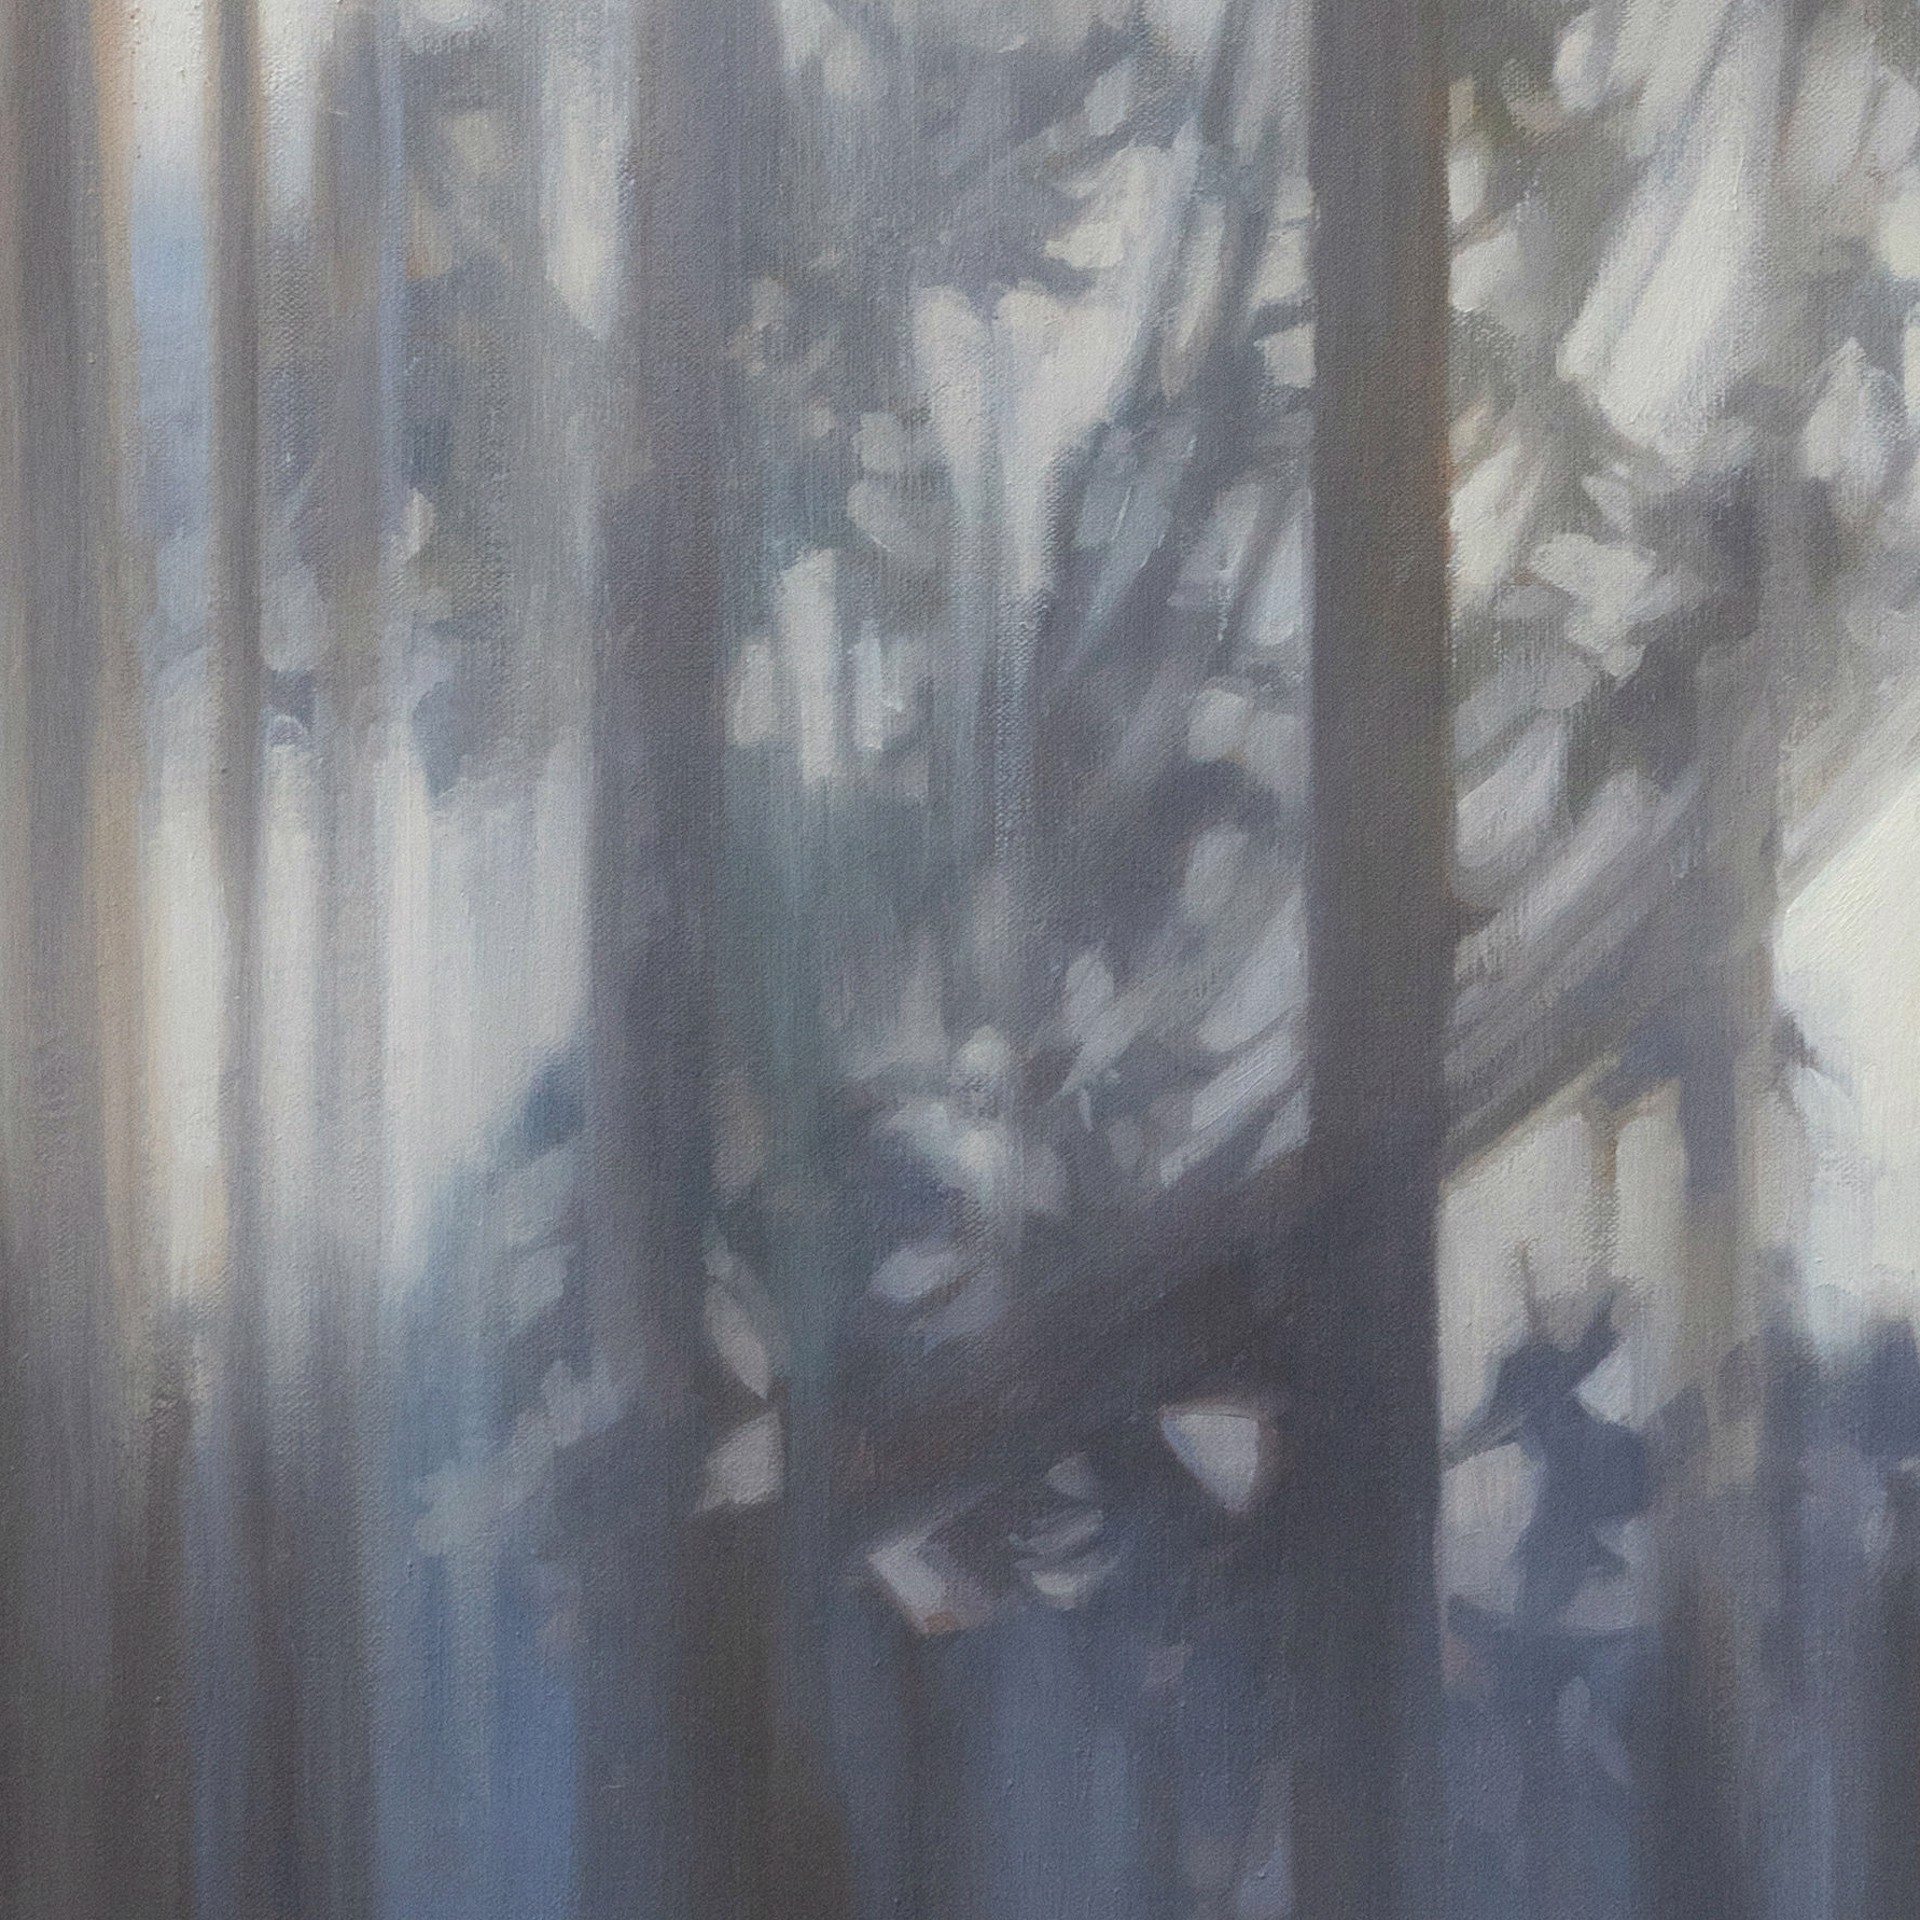 Oil painting "Beginnings" by Robin Cole depicting an interior view through sheer curtains, with trees and foliage visible outside.